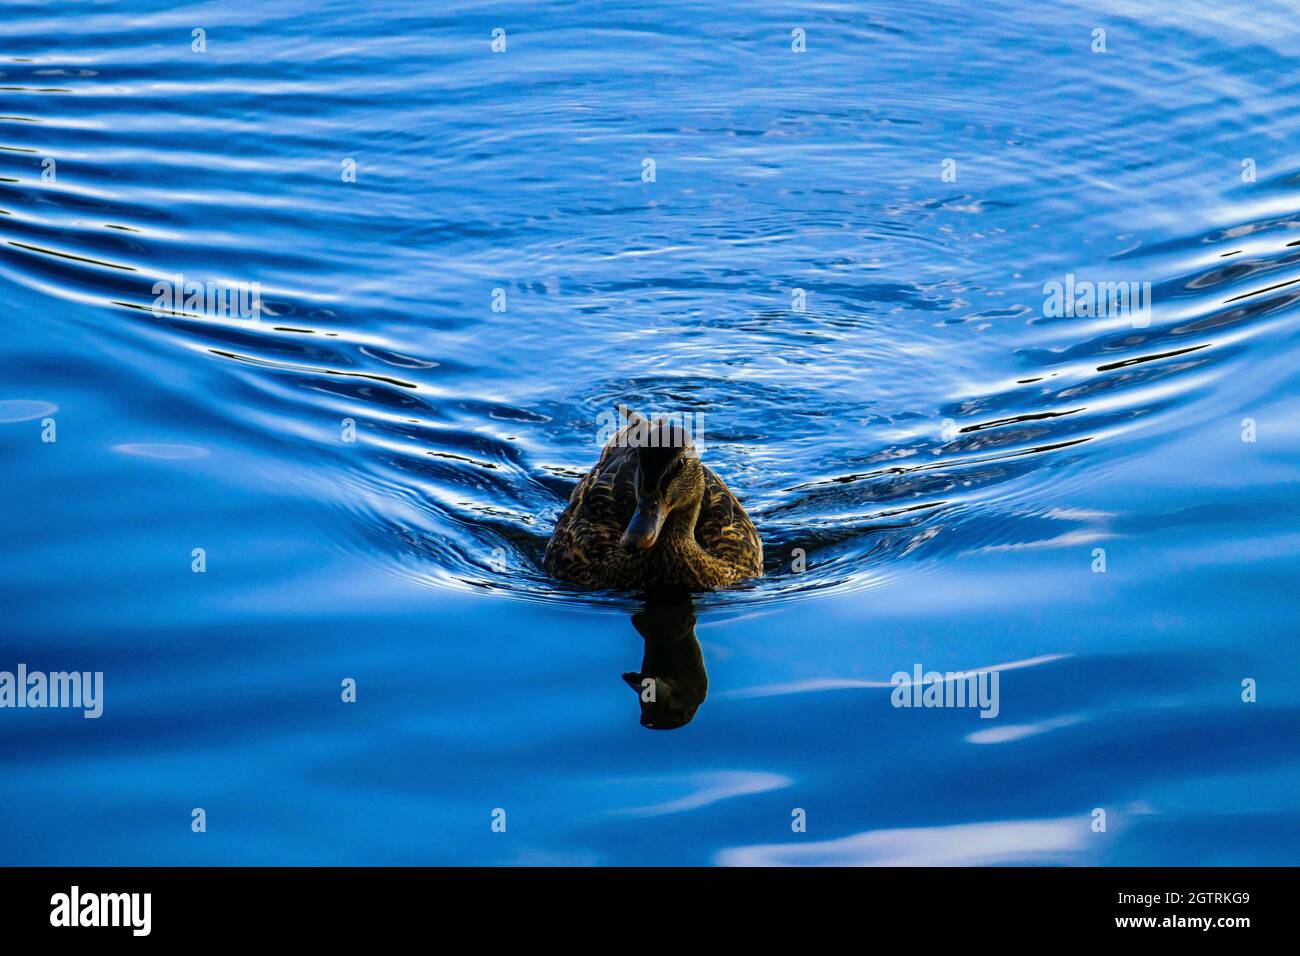 Sunny Summer Day At The Baldeneysee. A Duck Comes Swimming Into My Direction In The Deep Blue Water. Stock Photo